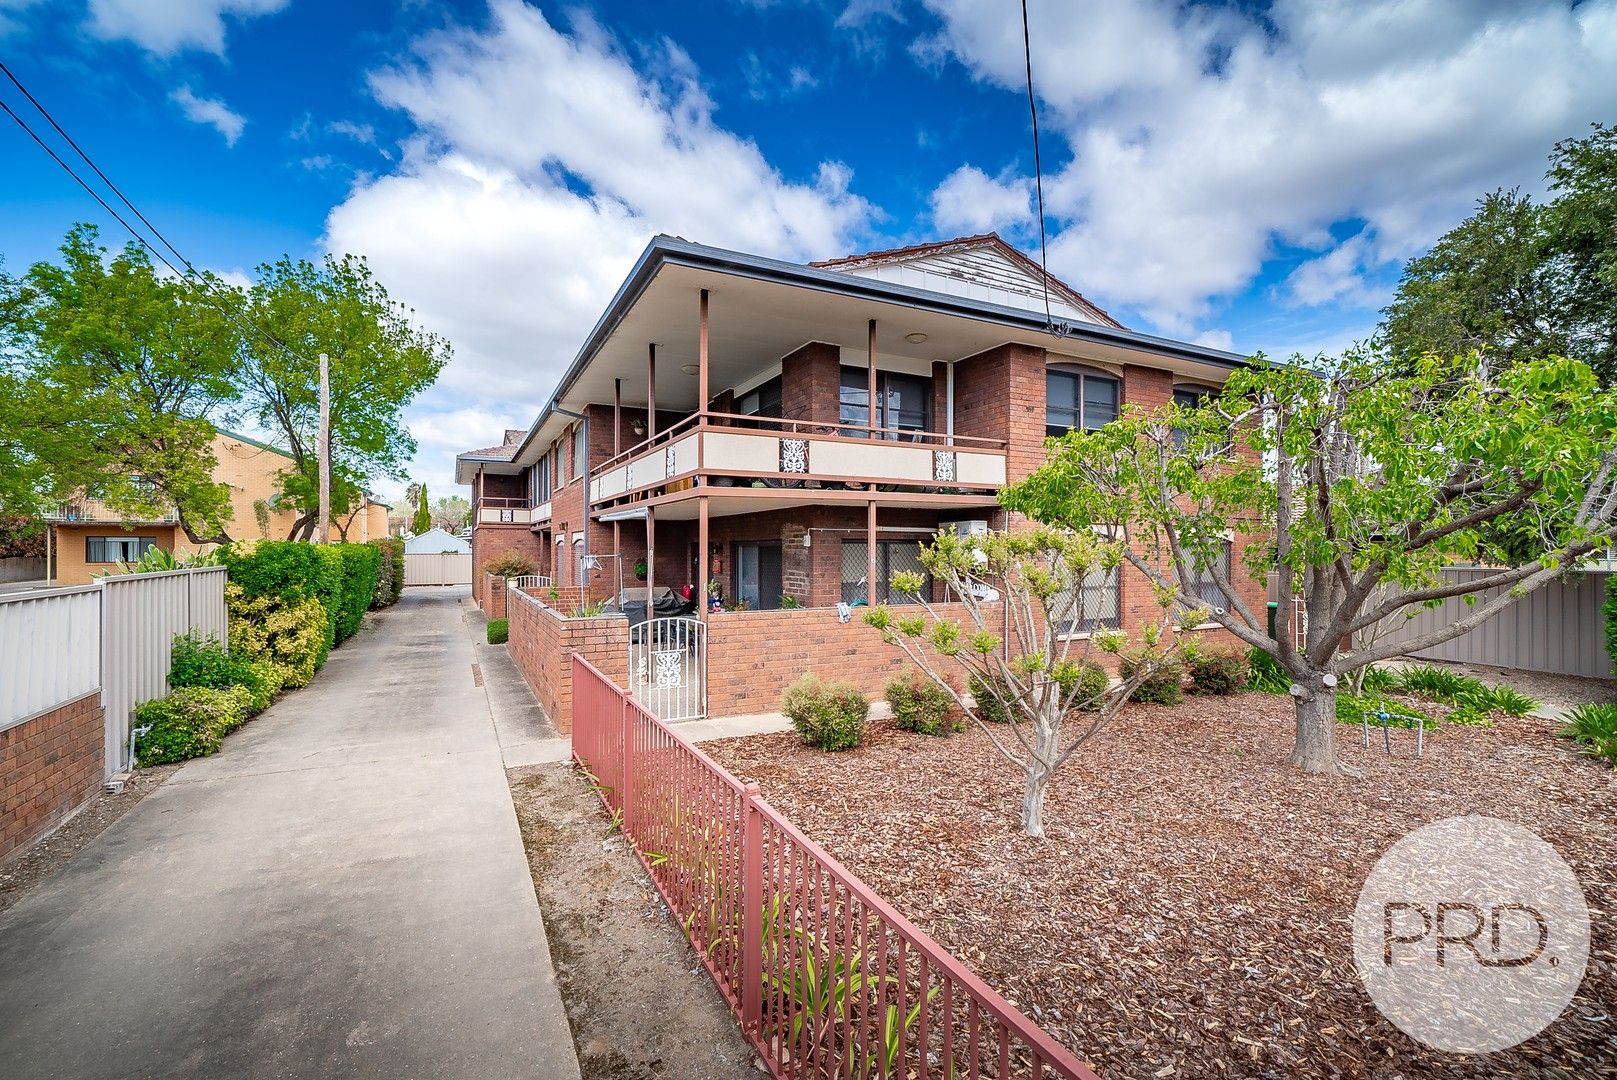 2 bedrooms Apartment / Unit / Flat in 4/6 Lampe Ave WAGGA WAGGA NSW, 2650